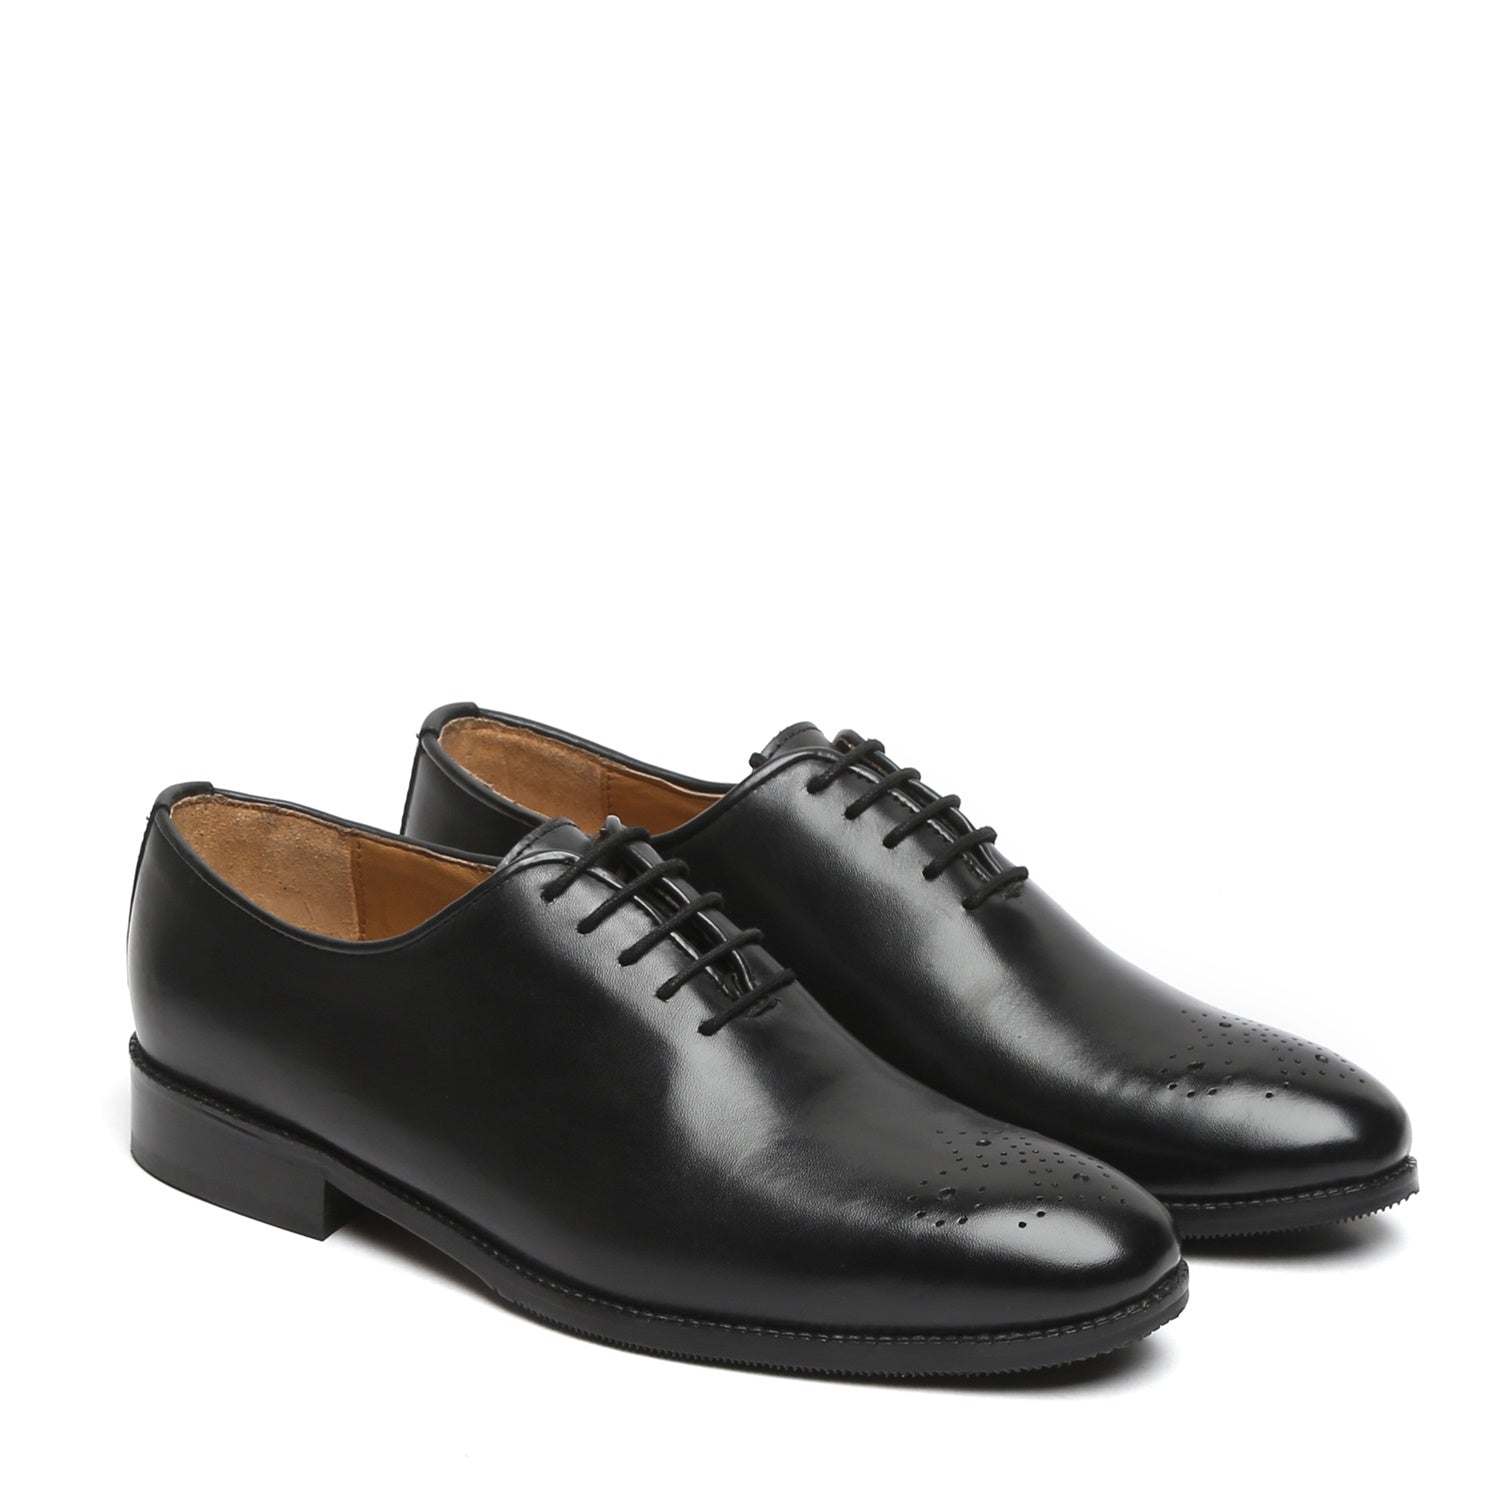 Black Leather Oxford Lace-Up Shoe Whole Cut/One Piece Medallion Toe By